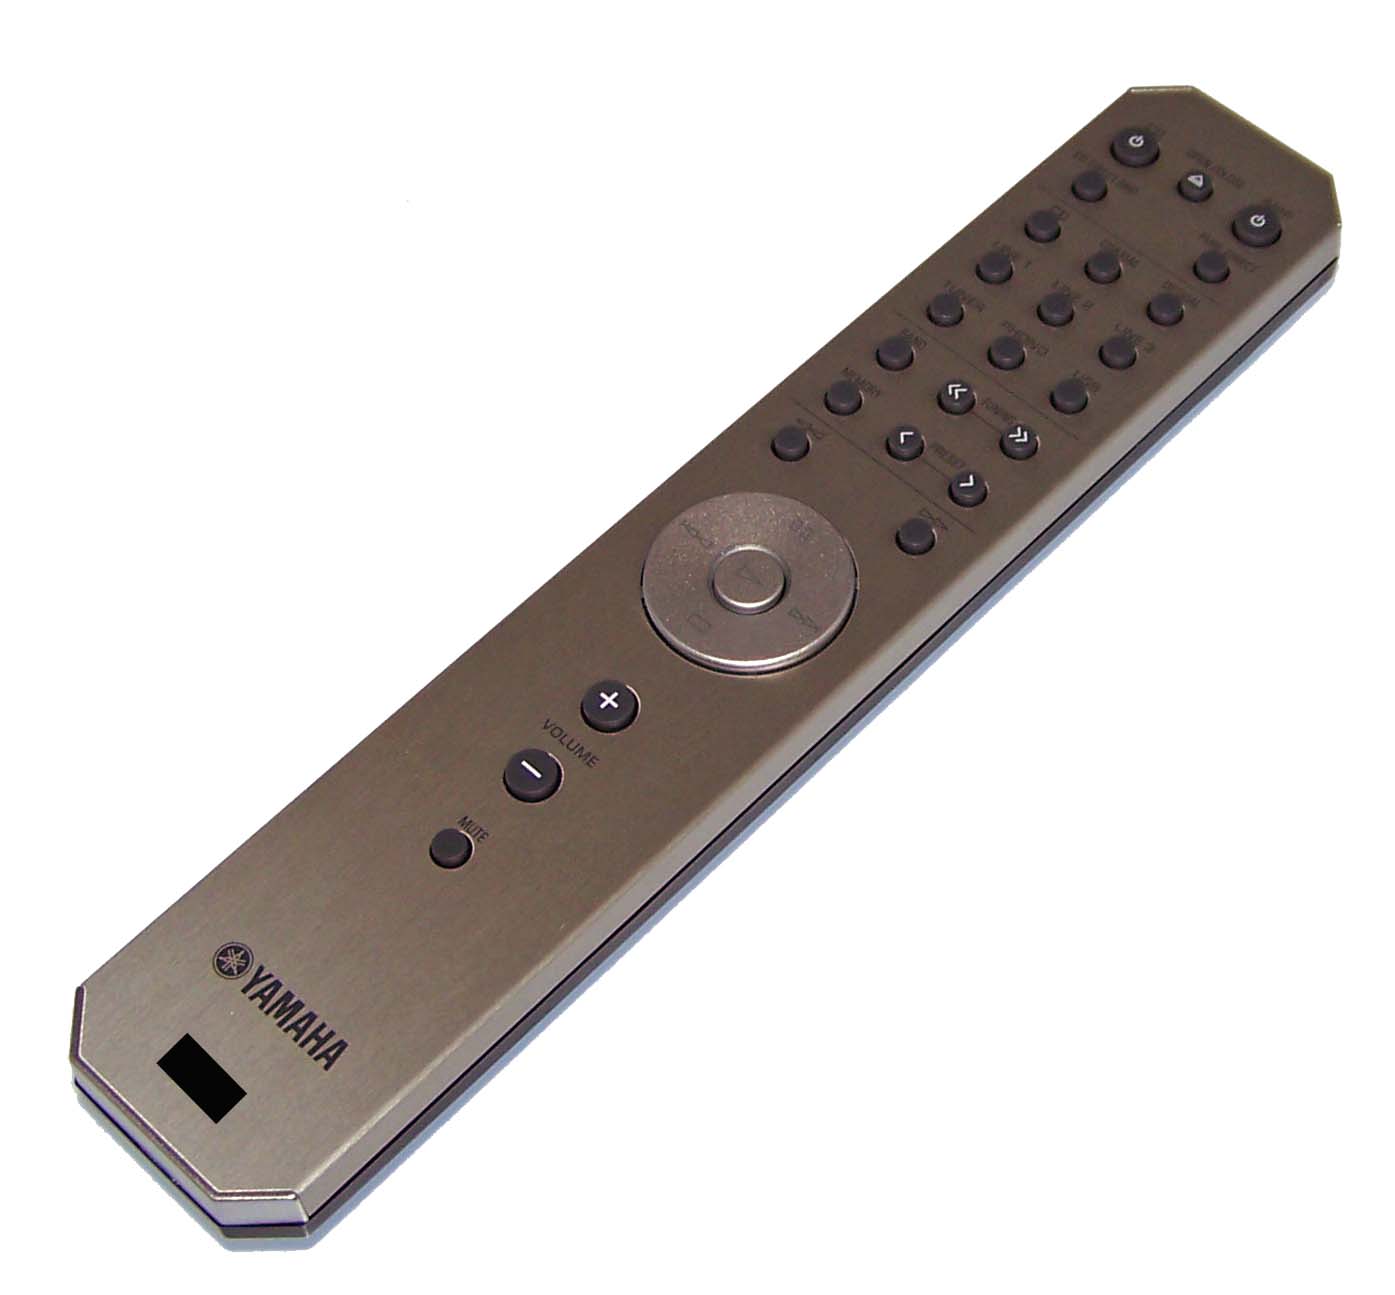 OEM Yamaha Remote Control Shipped With AS801, A-S801, AS801ML, A-S801ML